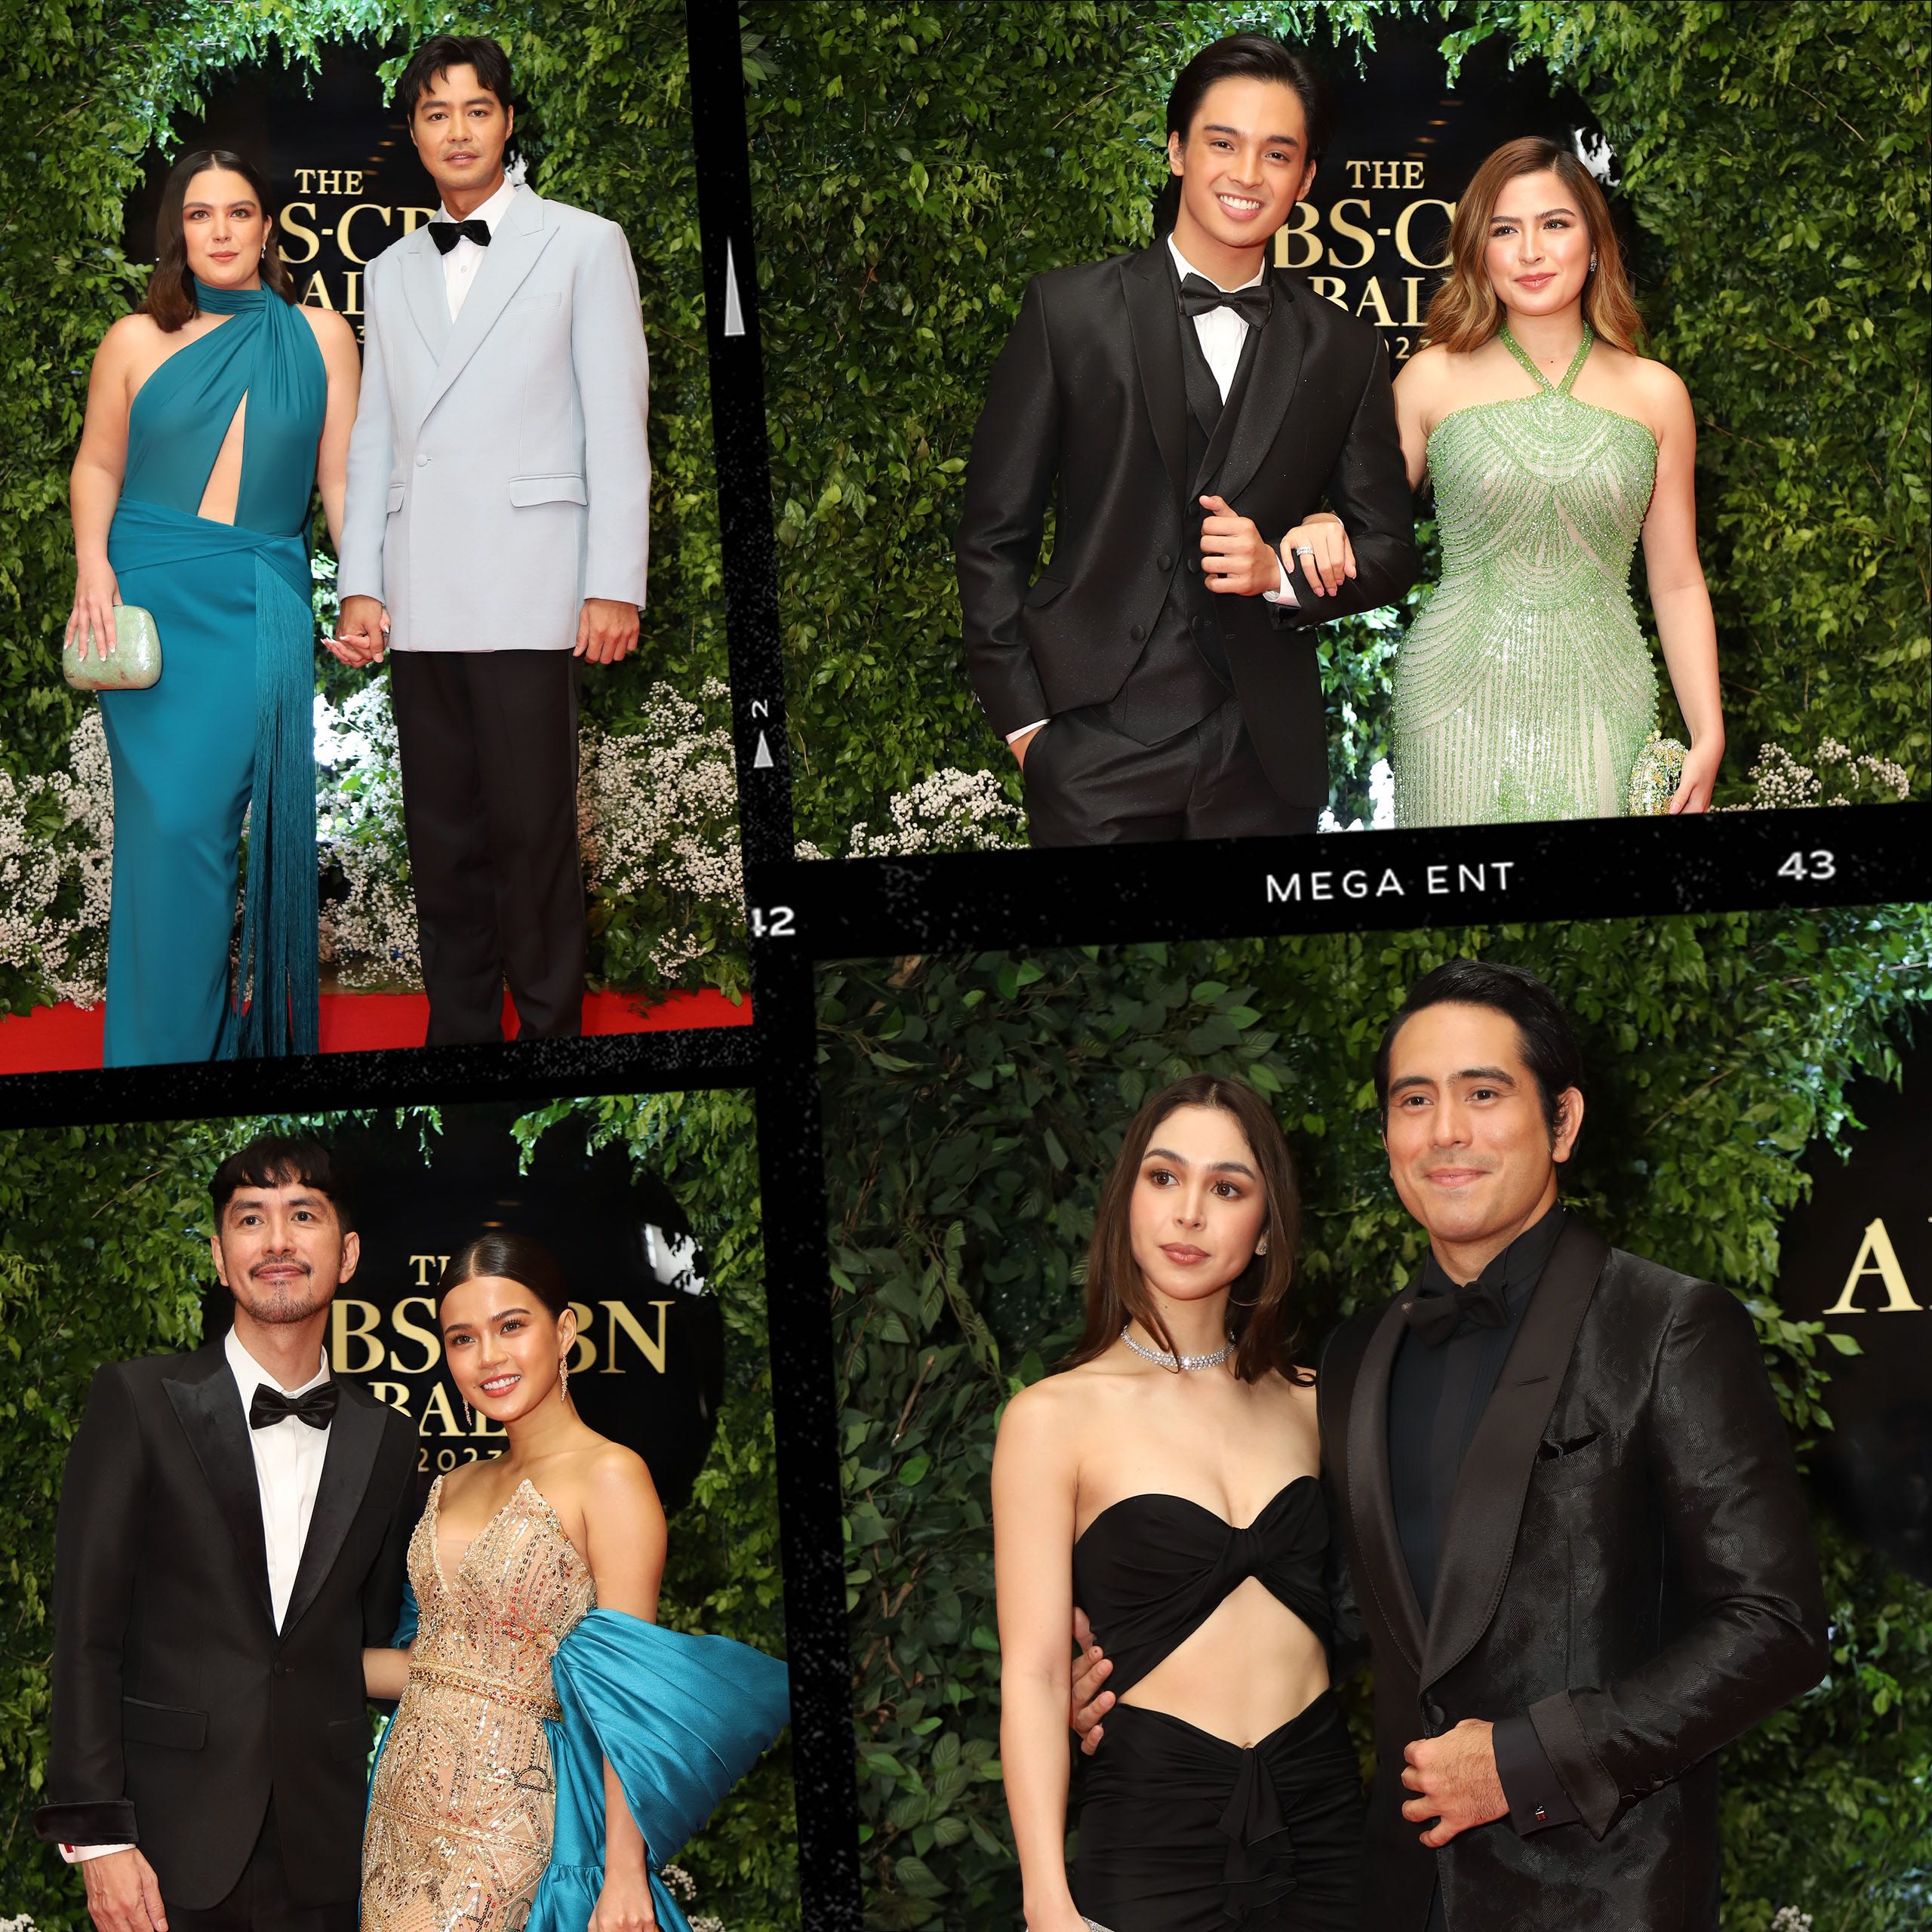 These Couples Bring Their Love at the ABS-CBN Ball